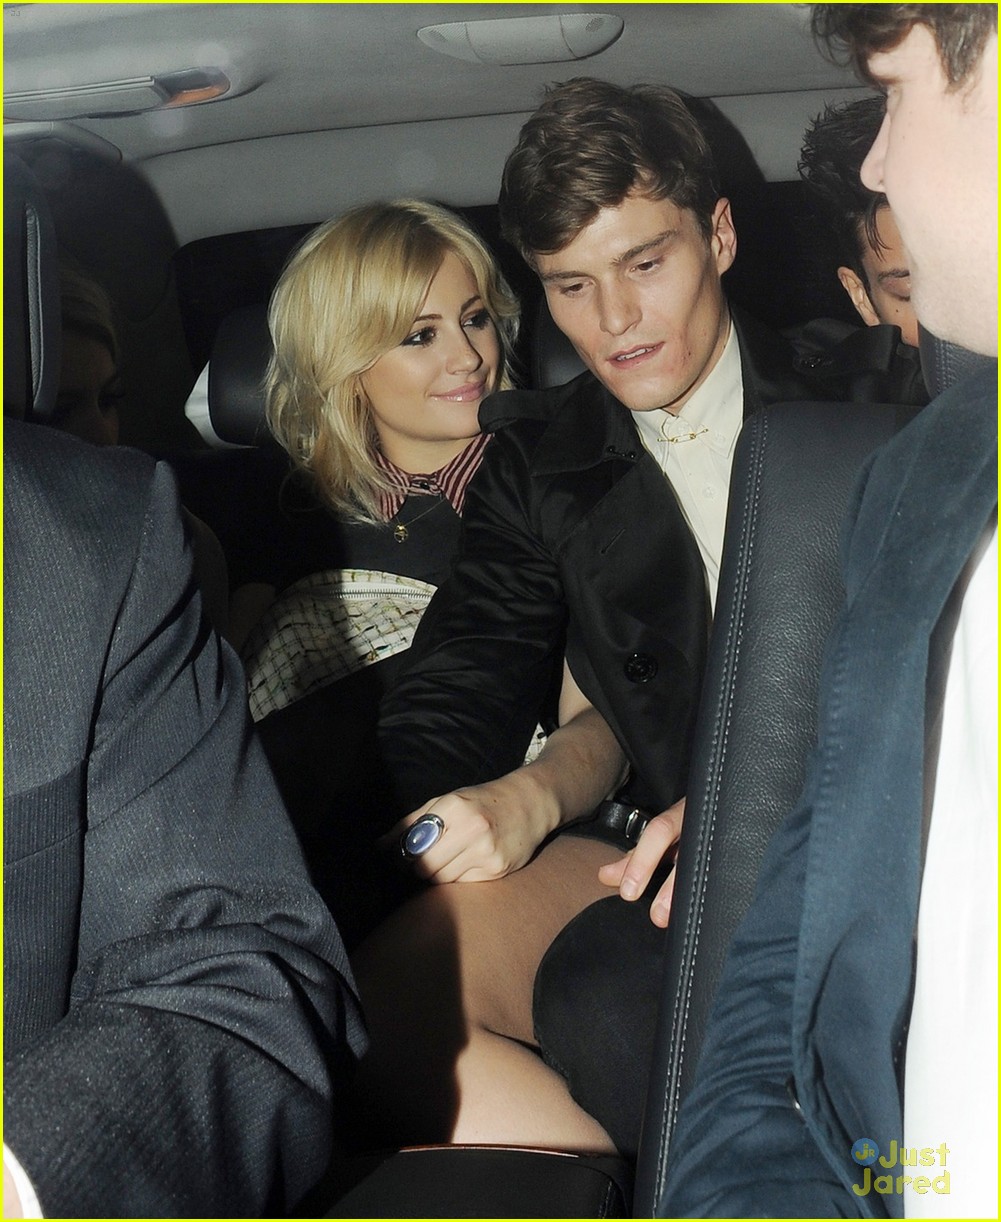 pixie lott oliver cheshire party 03